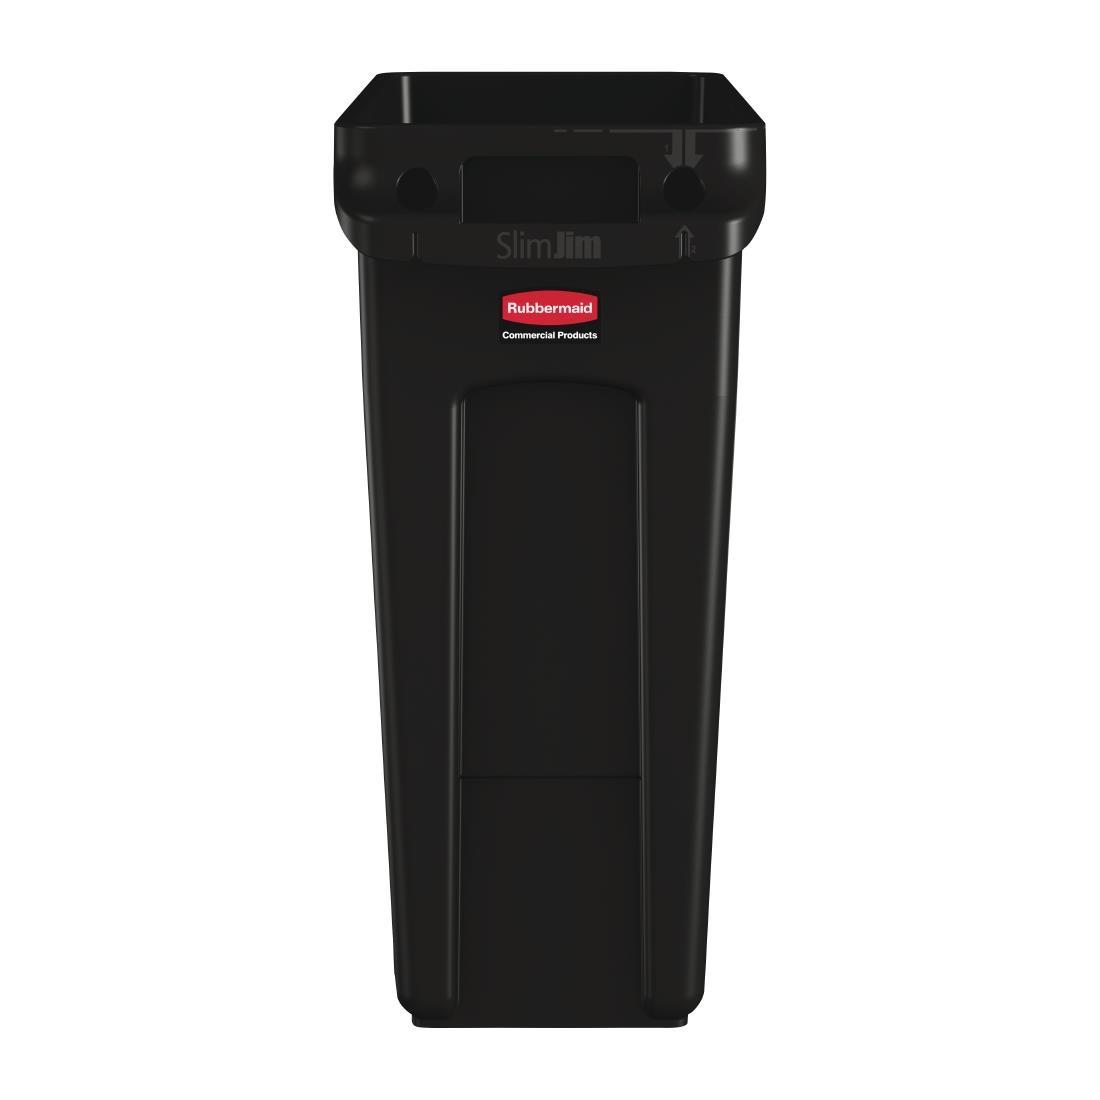 Rubbermaid Slim Jim Container With Venting Channels Black 60Ltr - CP652  - 2